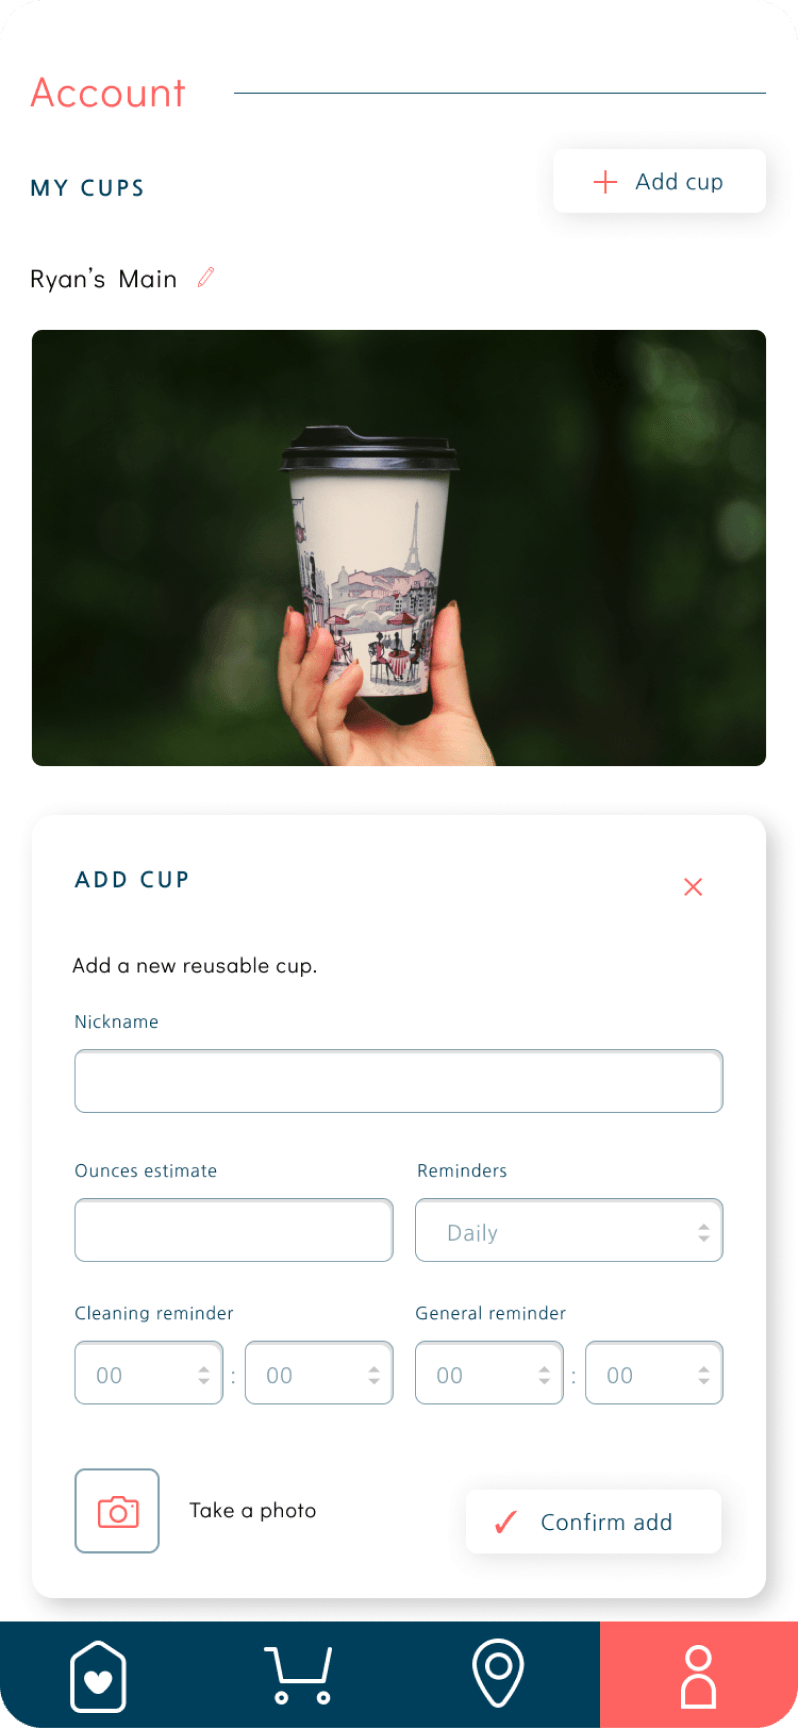 App account screen: adding a new cup